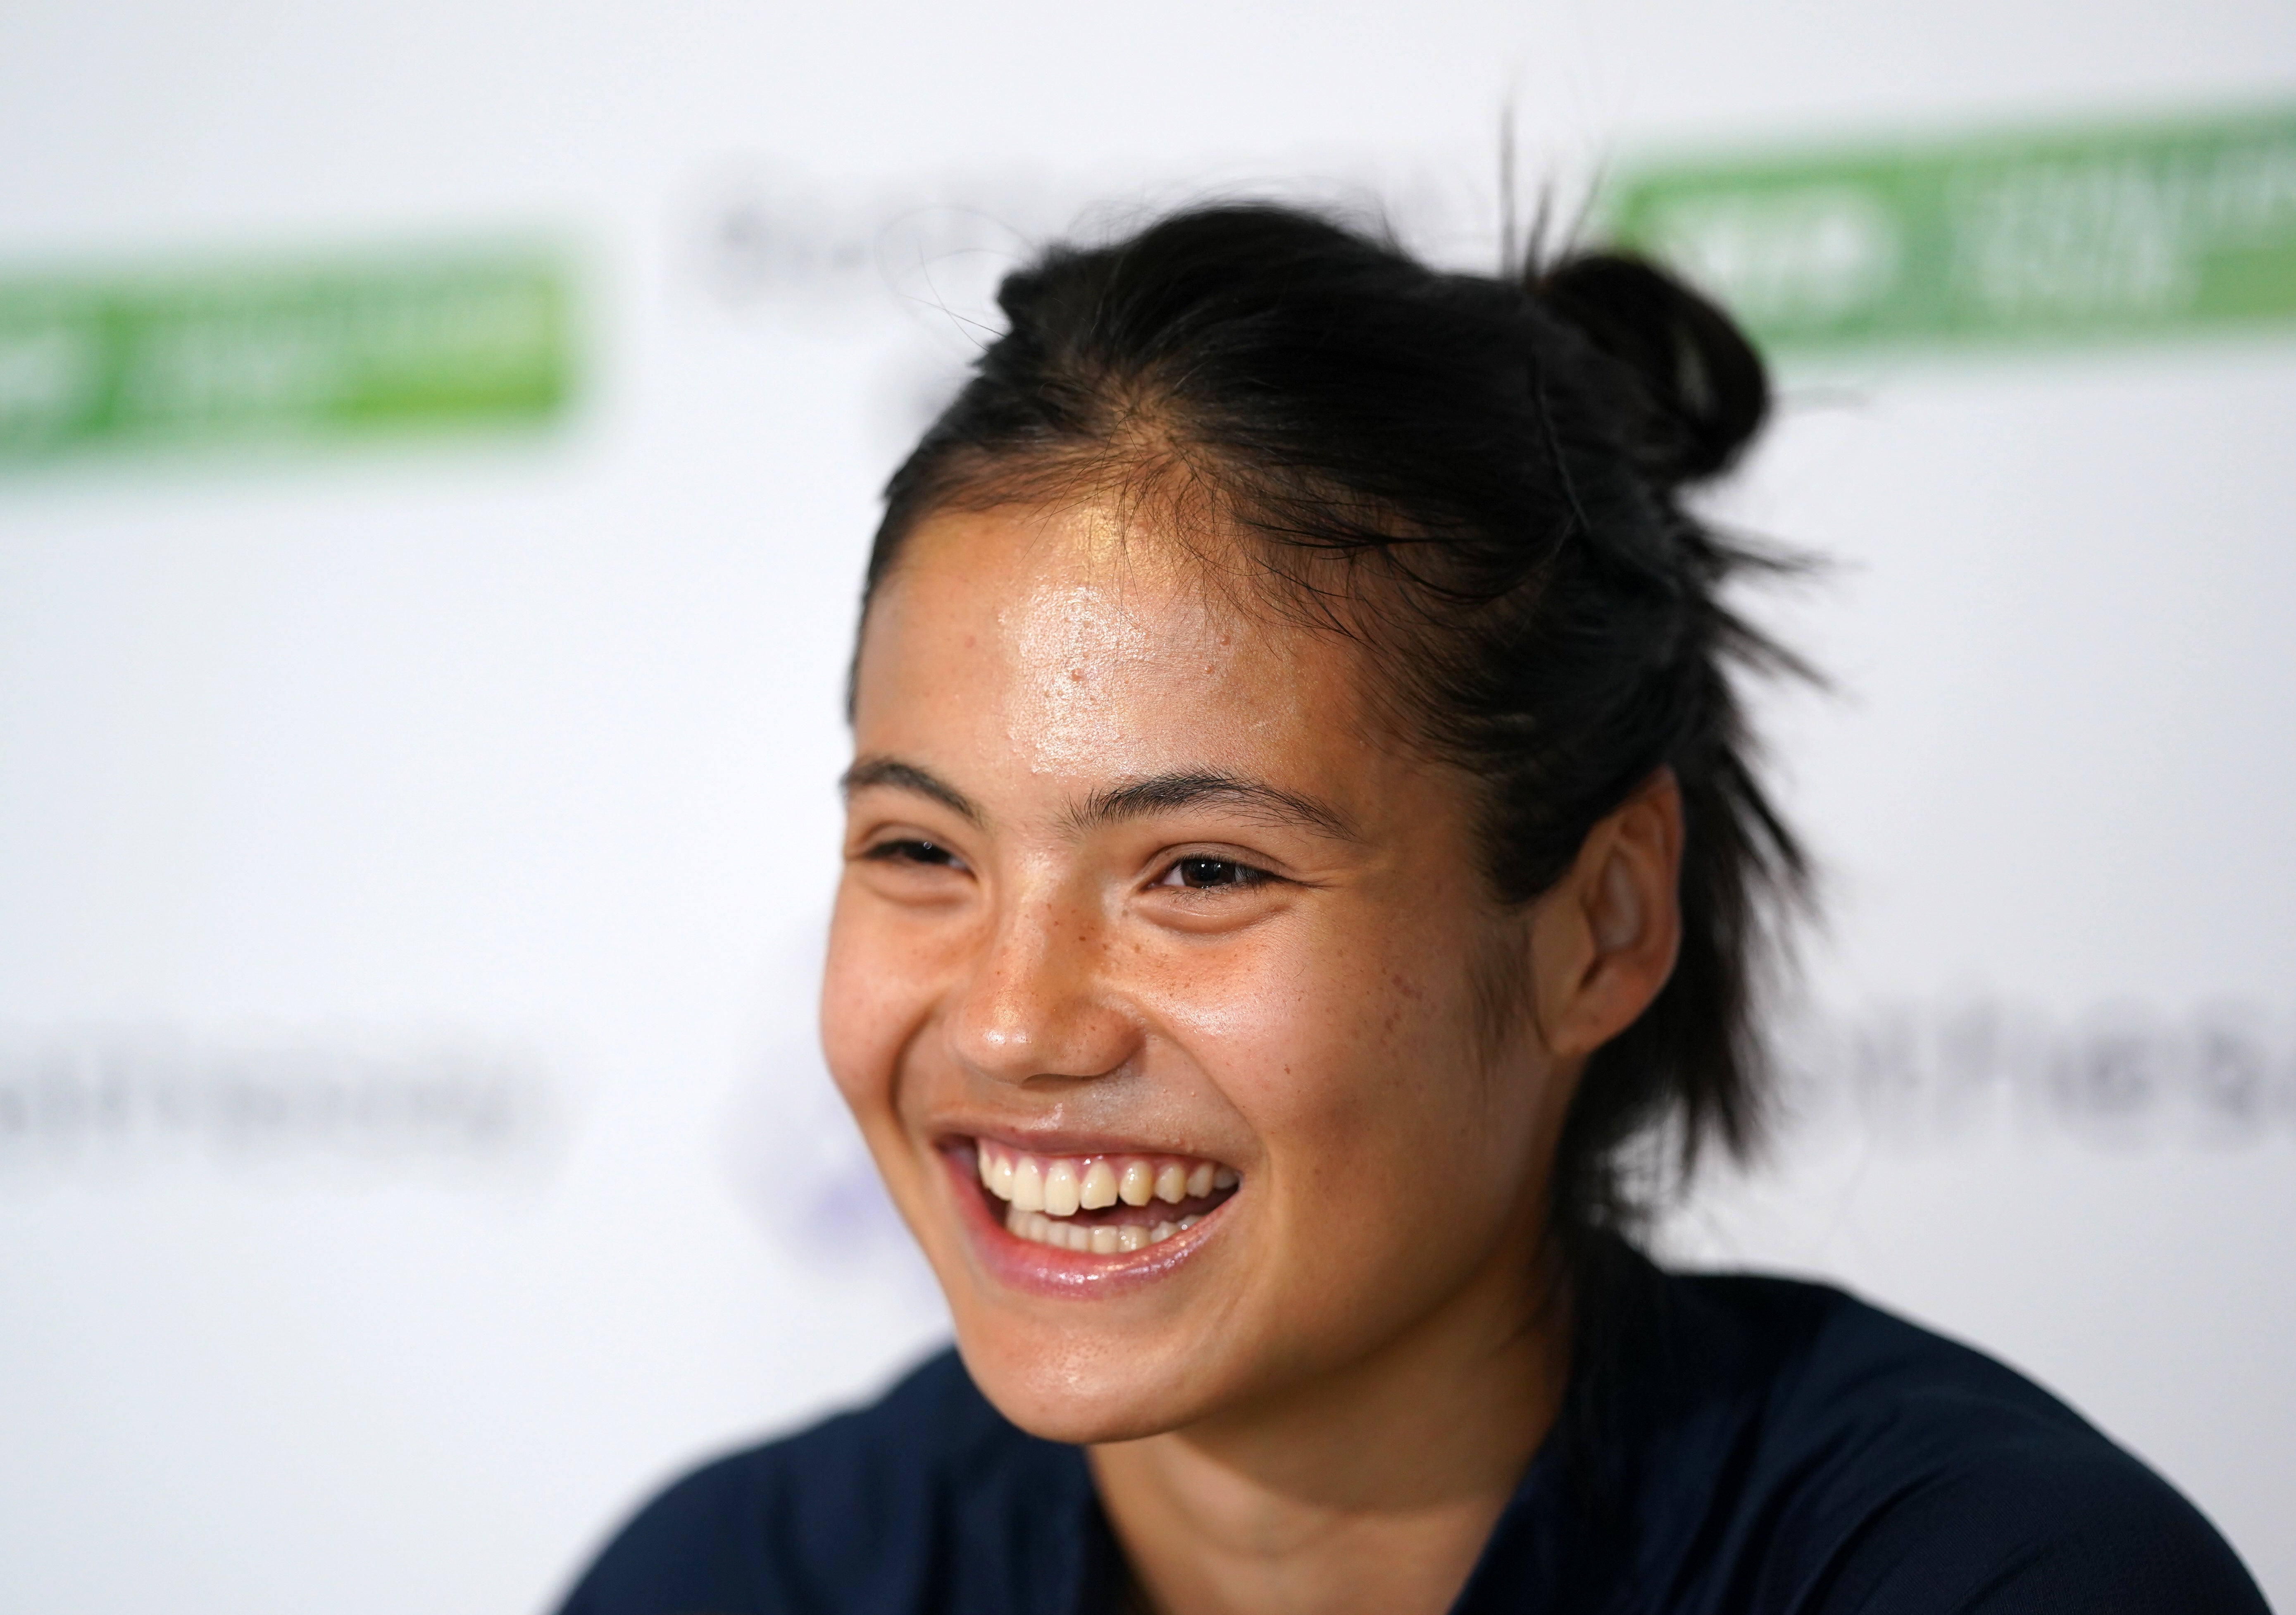 Emma Raducanu says she has had a “surreal” 12 months as she returns to the scene of her WTA Tour debut (Tim Goode/PA)